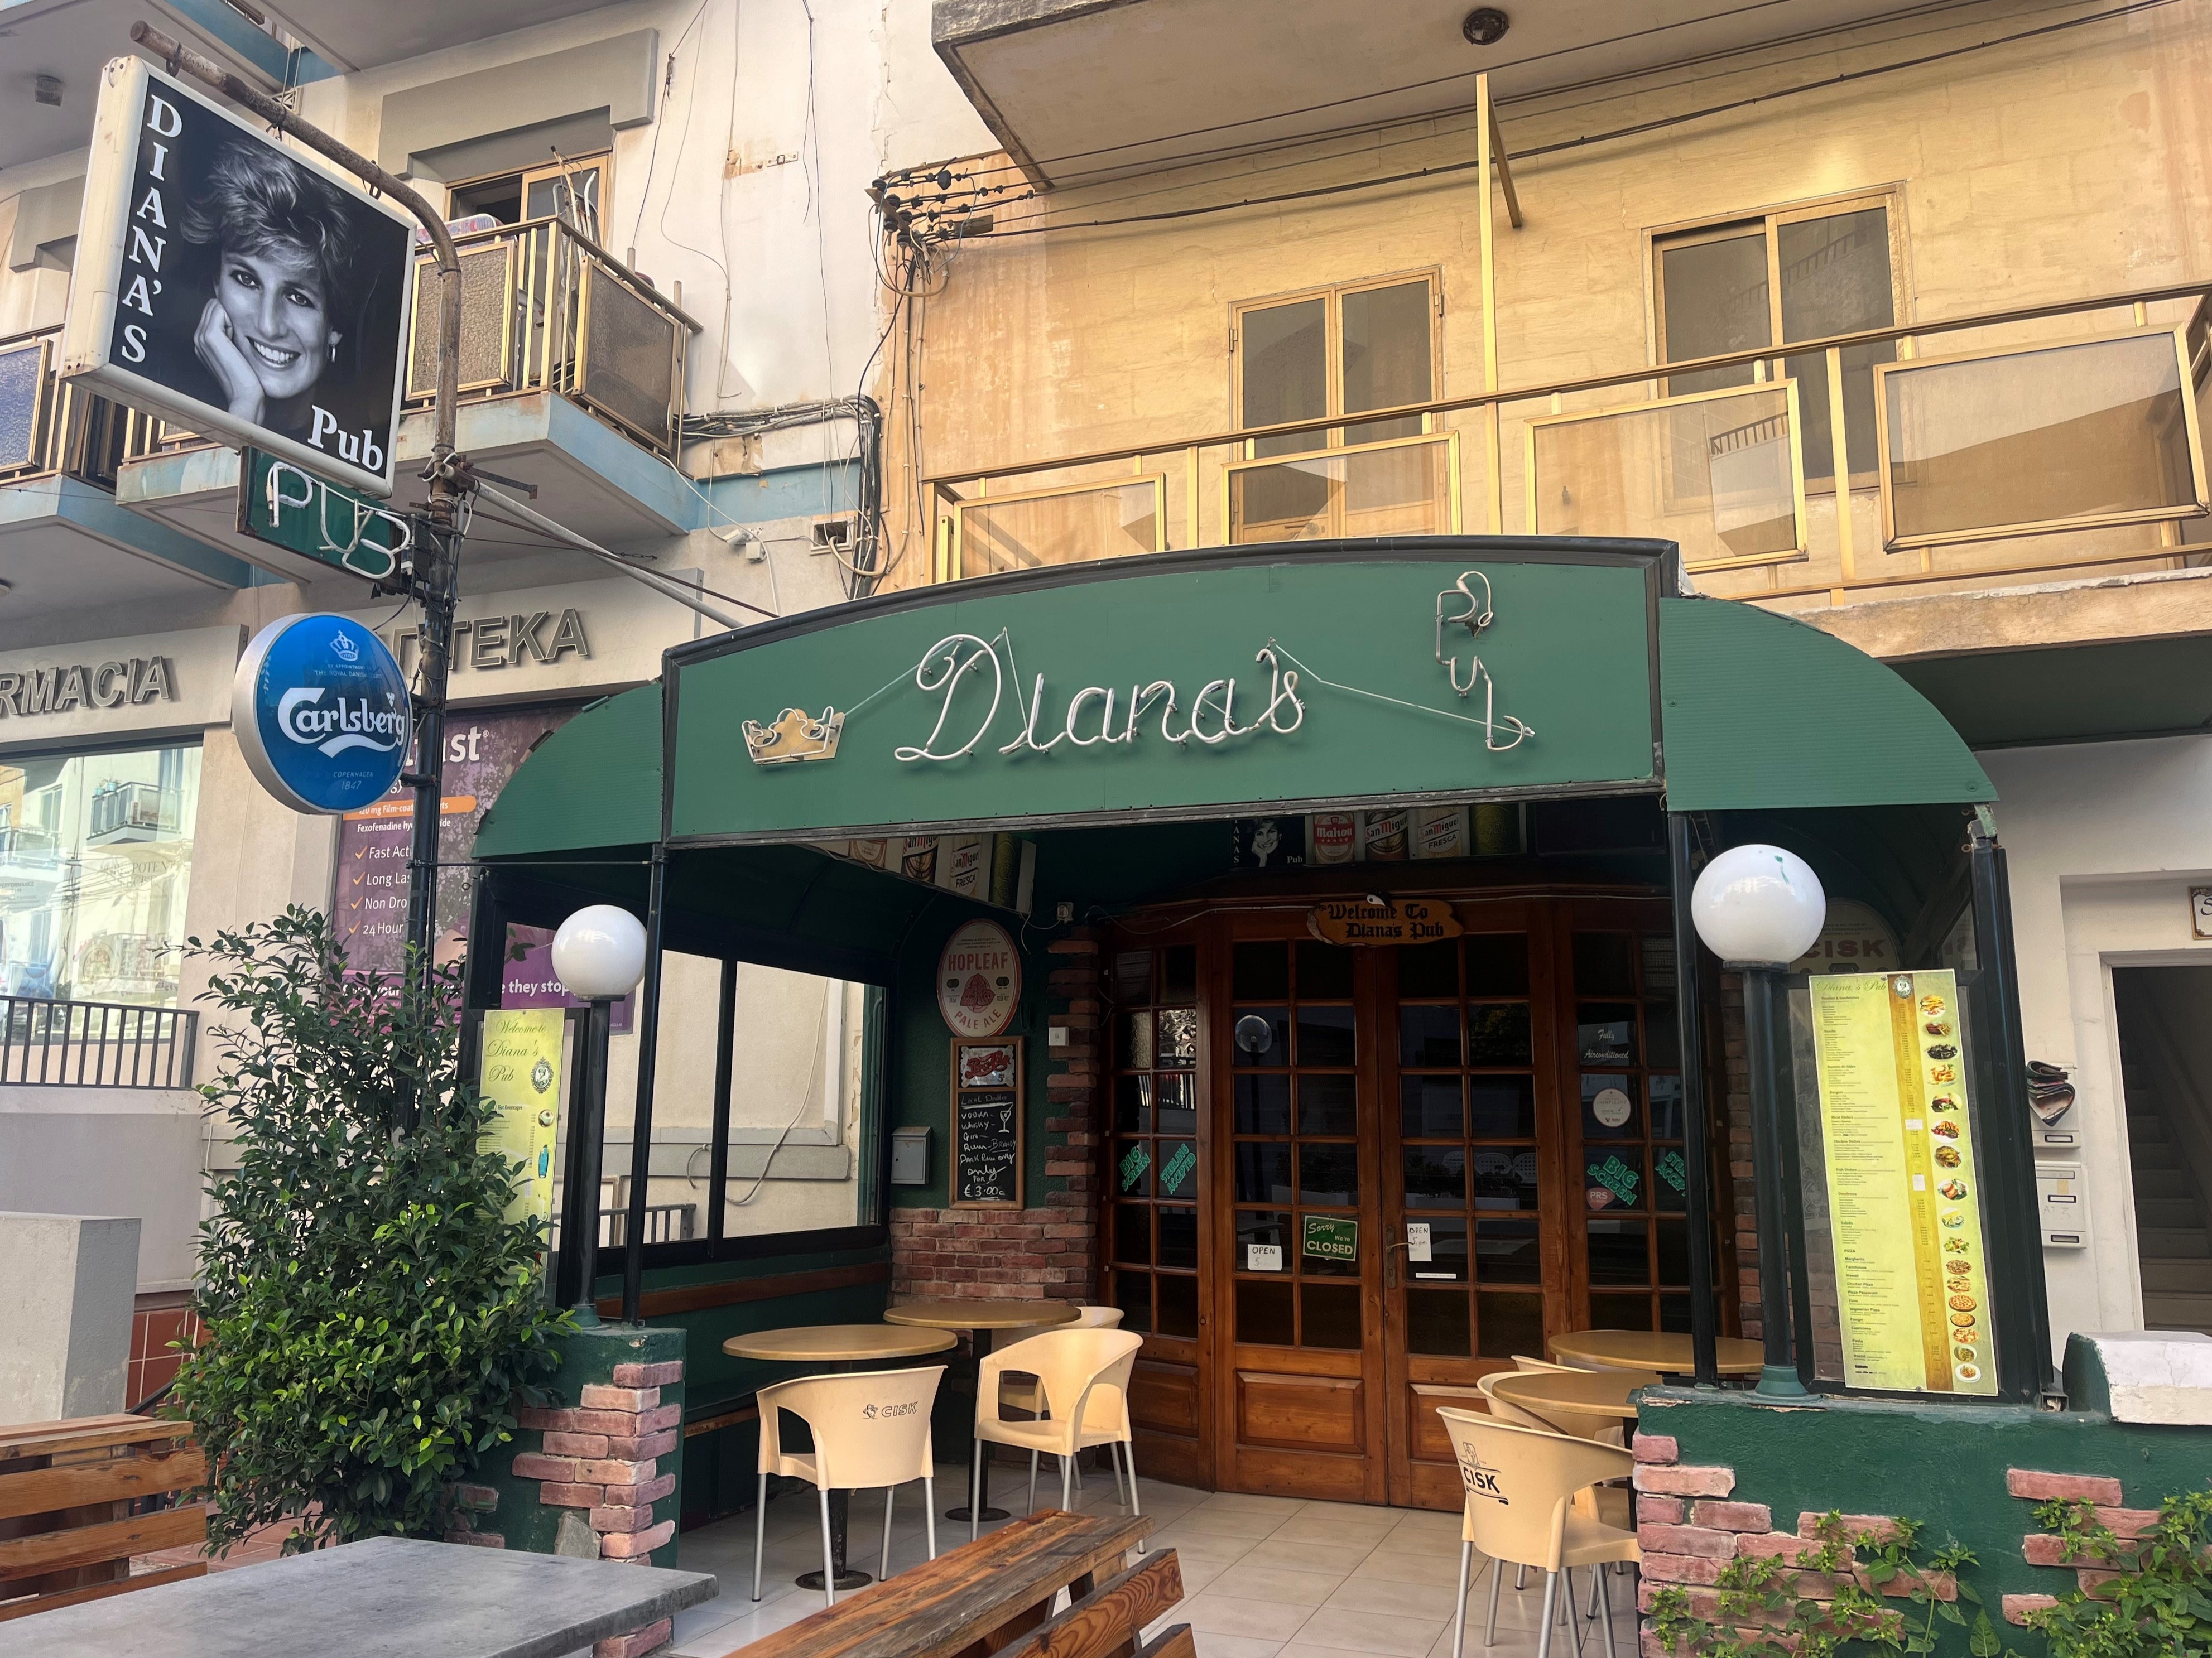 Not one but two pubs on Malta are dedicated to Diana